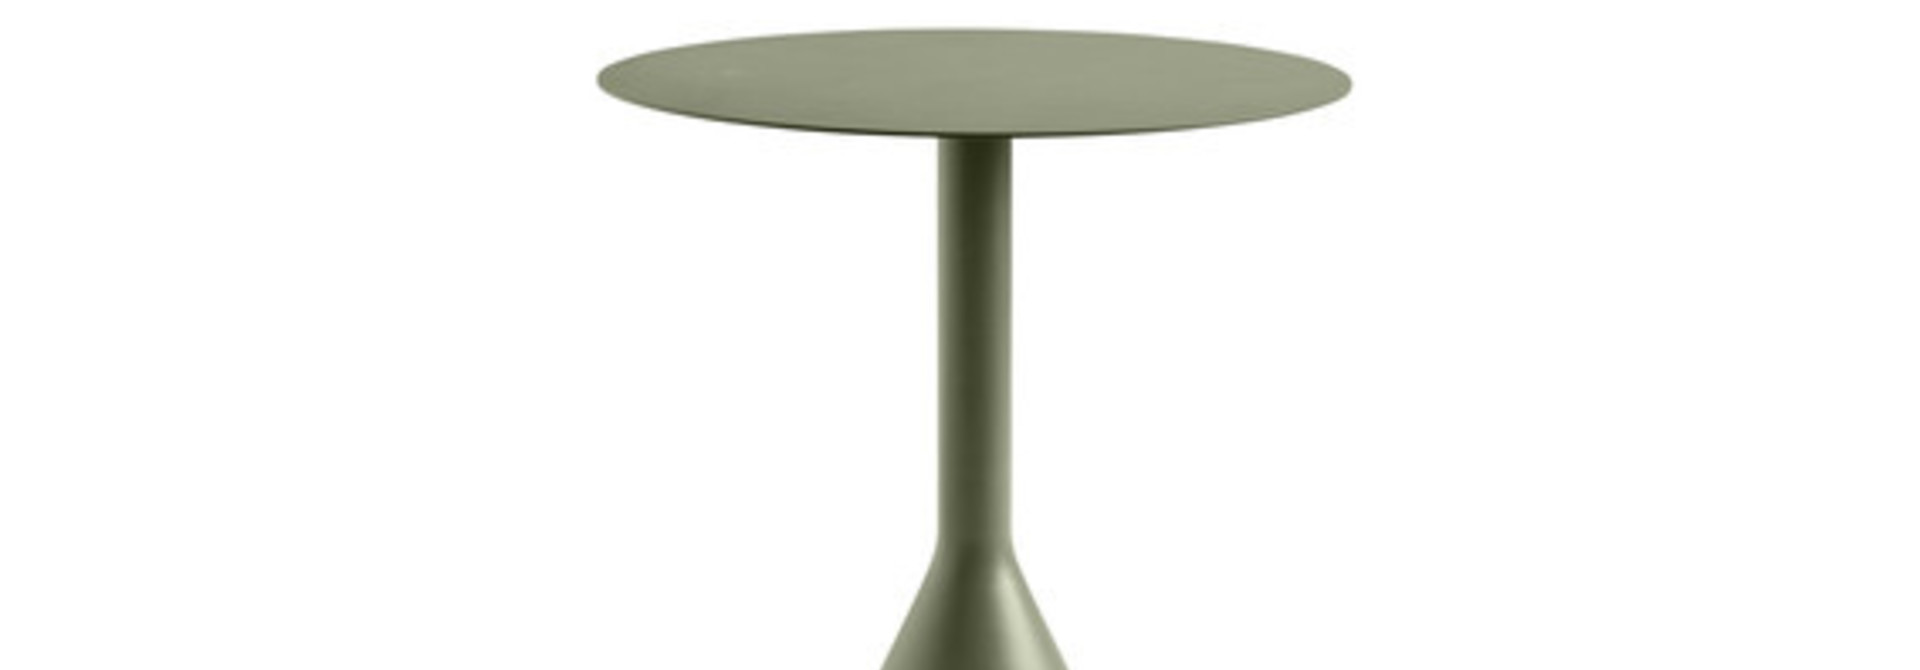 Palissade Cone Table round